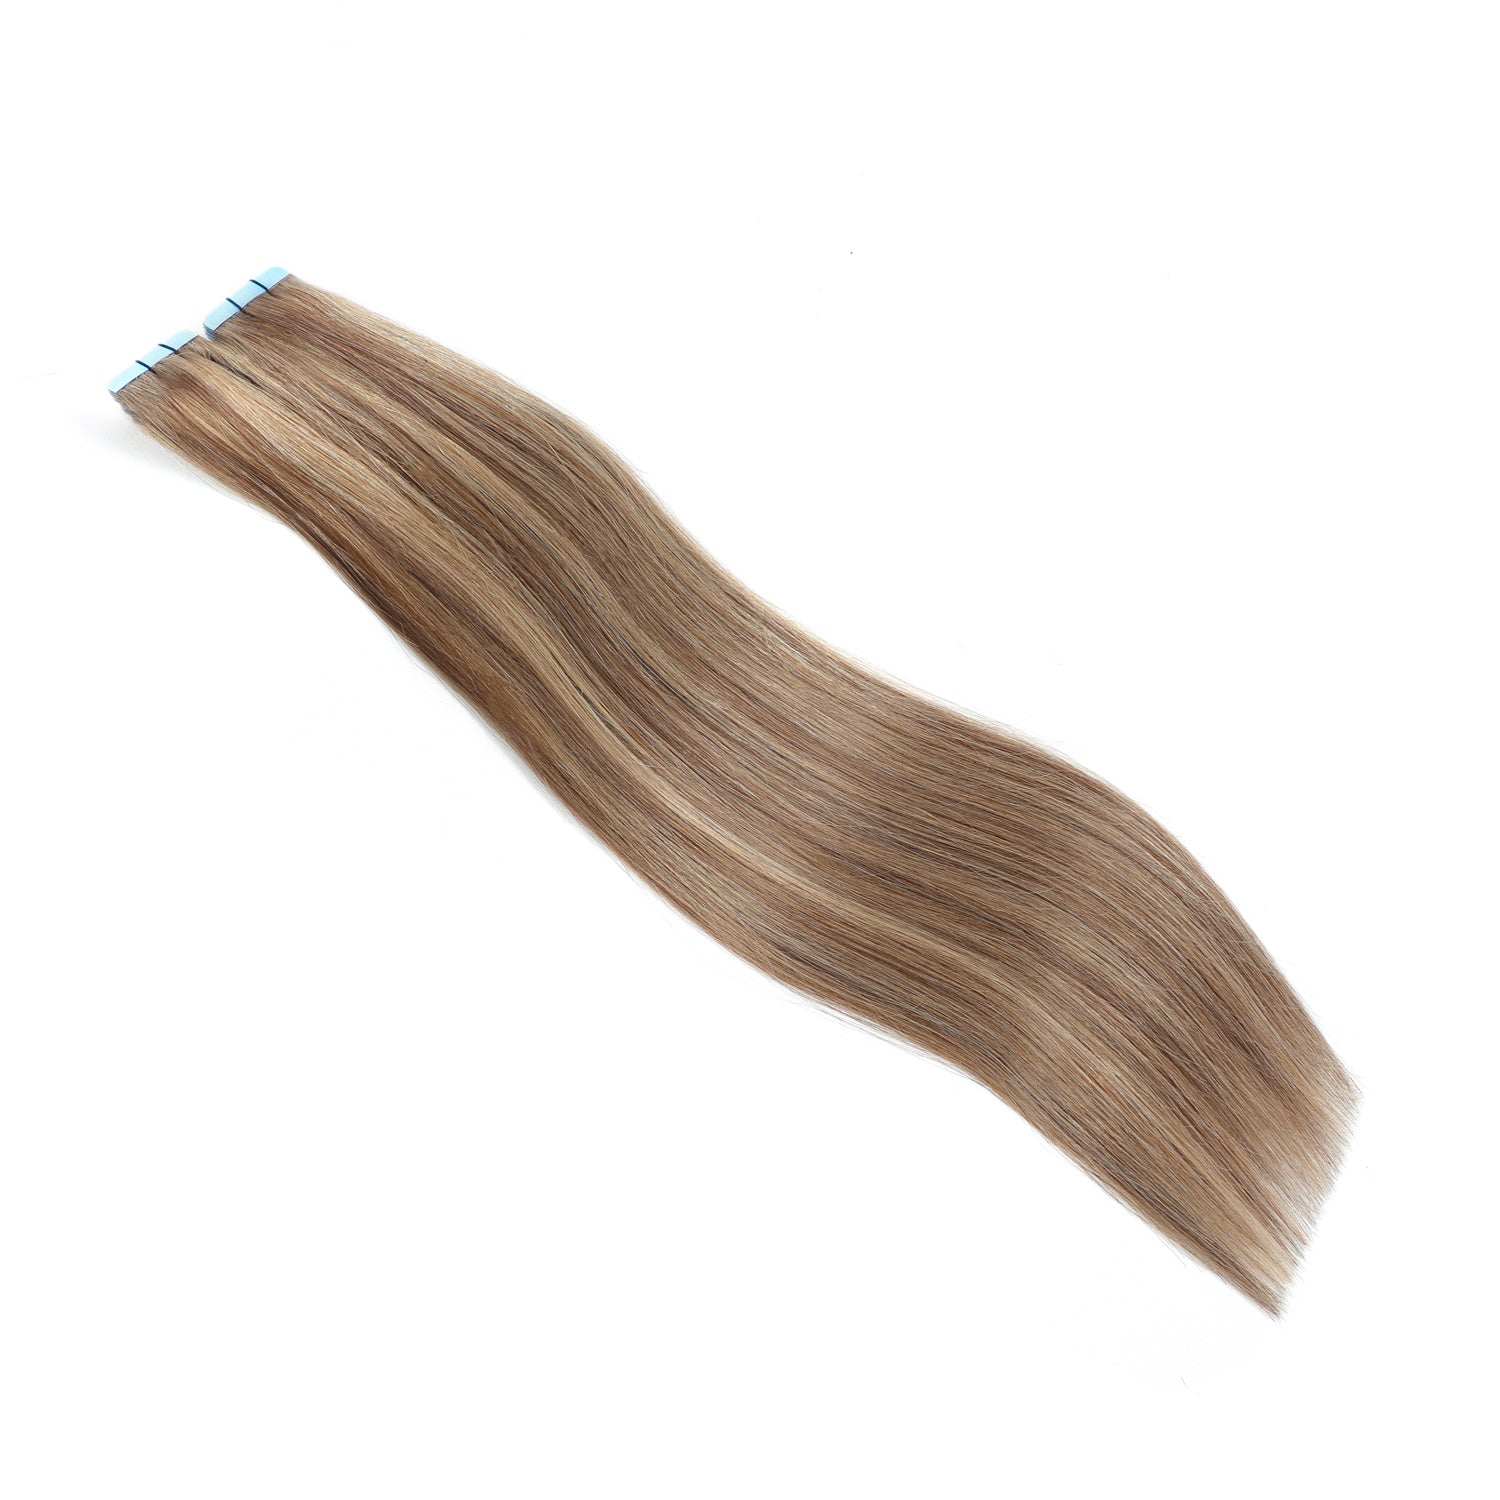 Seamless Tape Hair Extensions